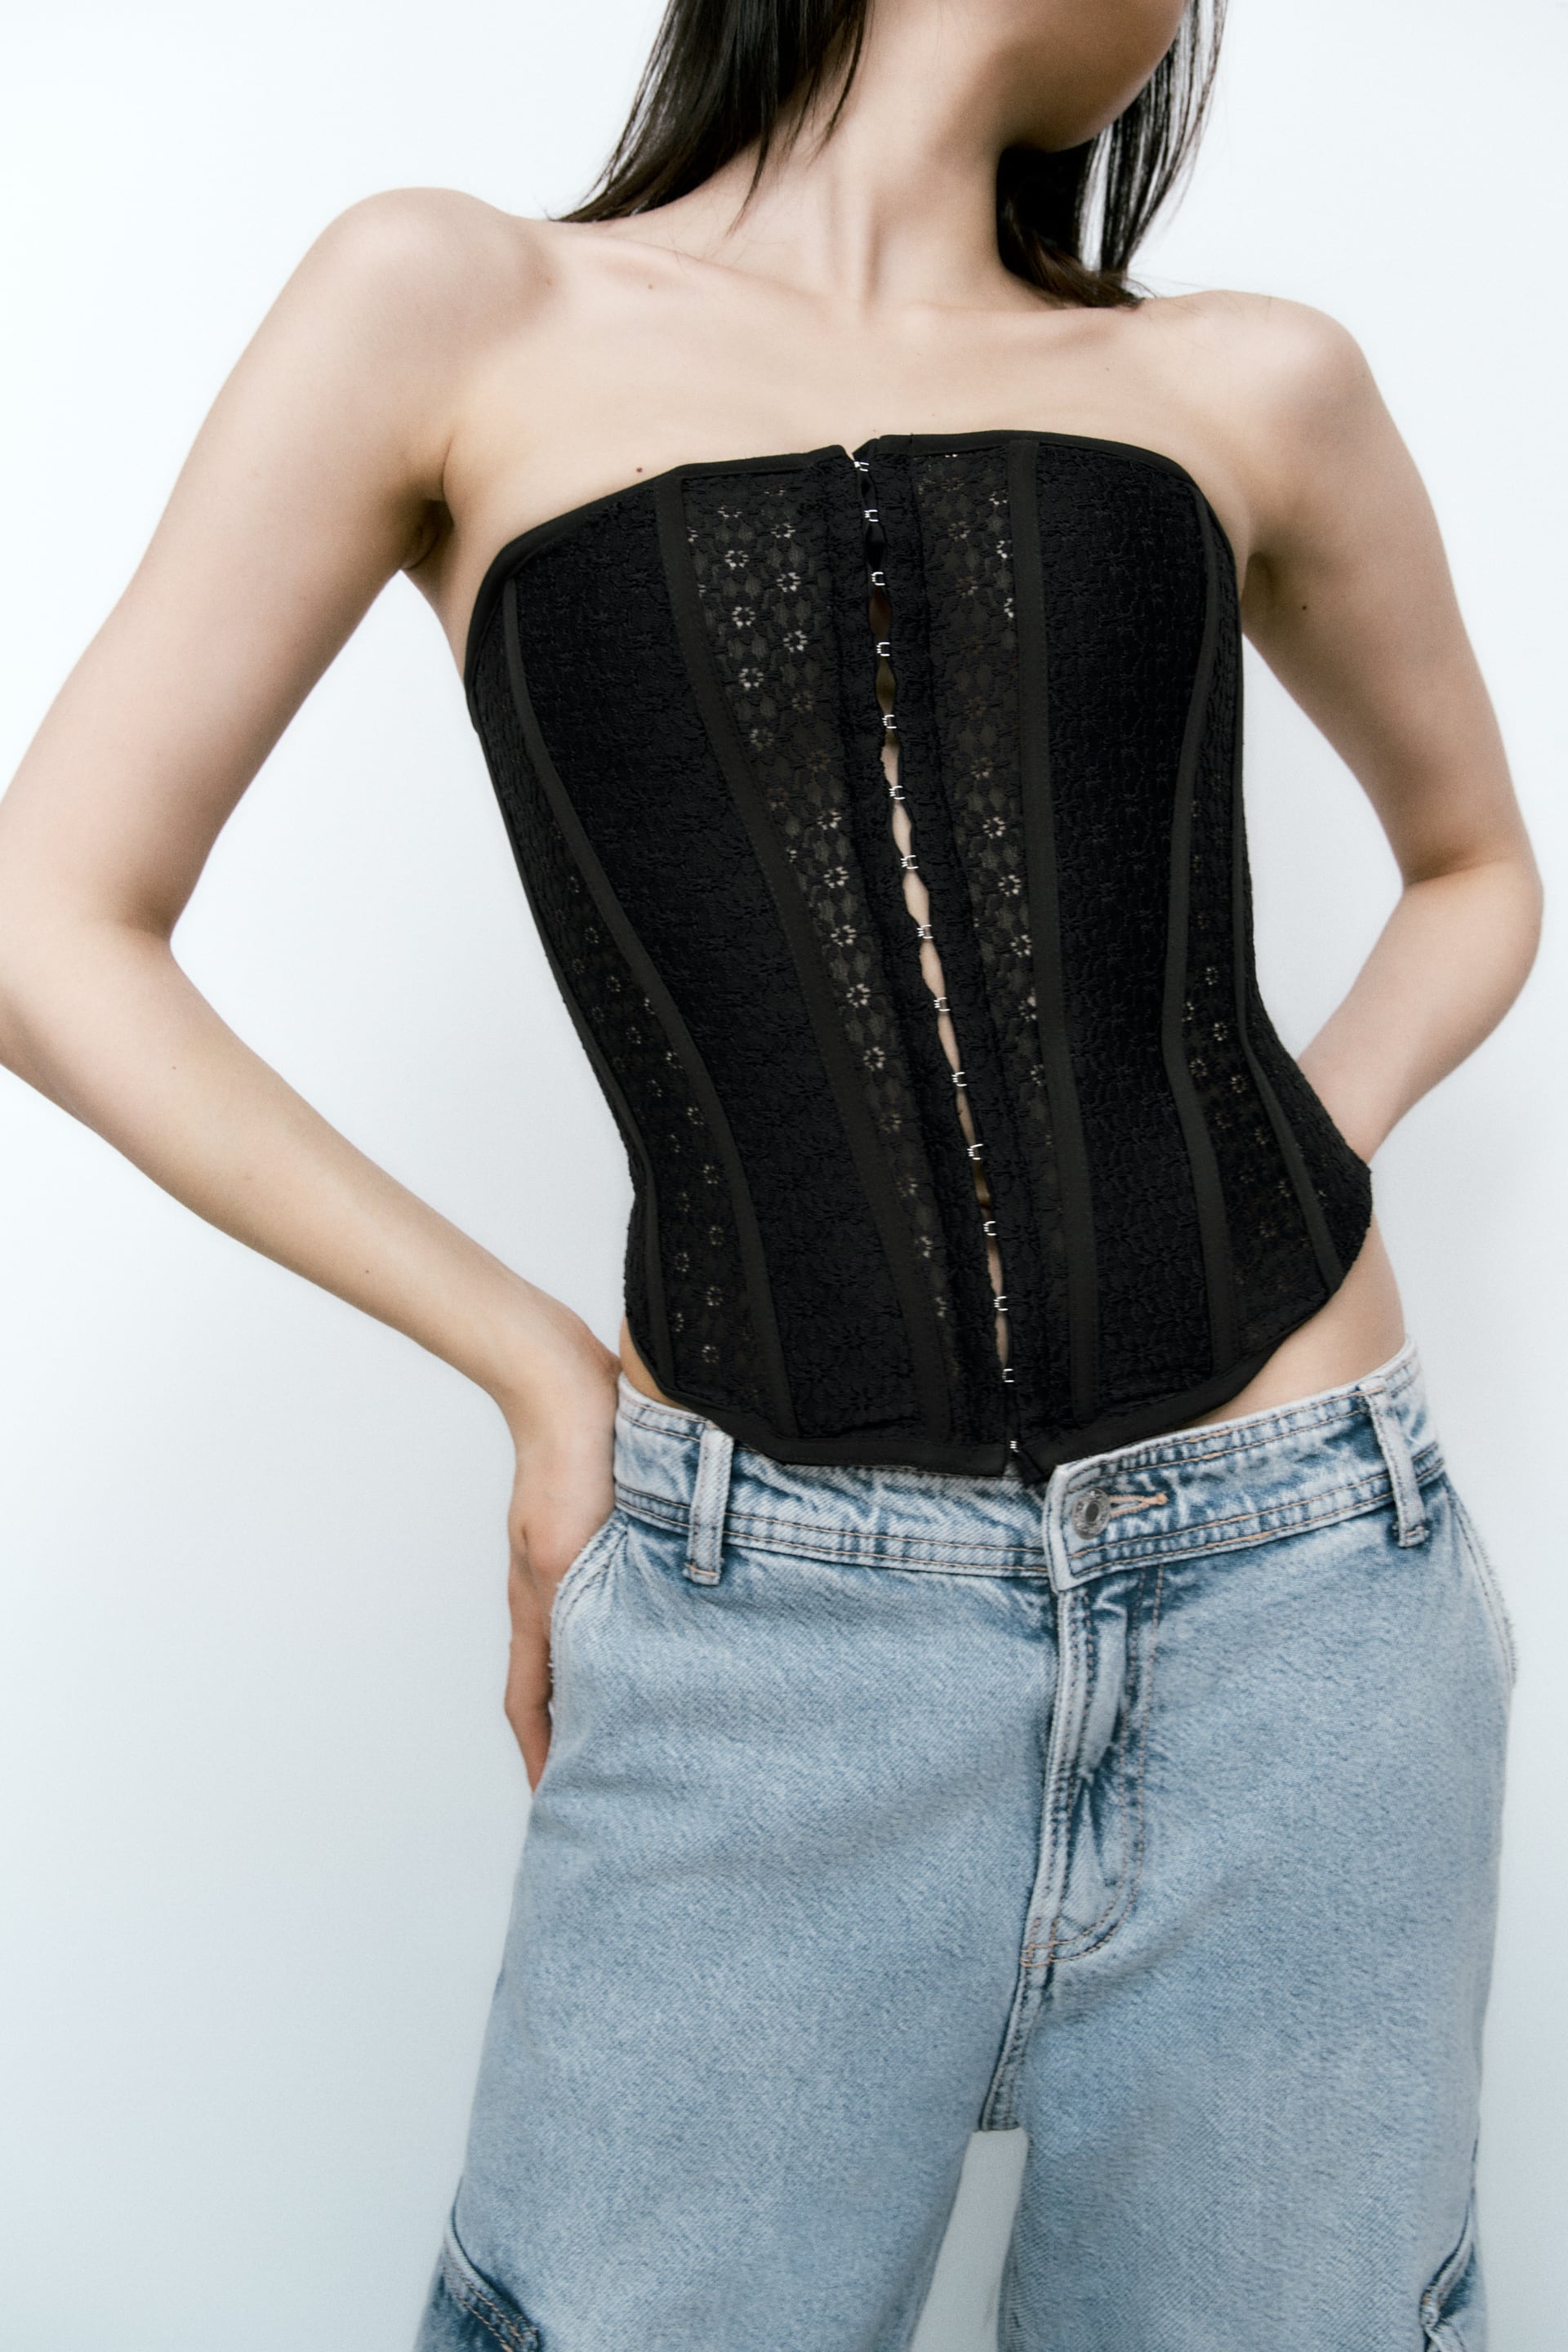 LACE CORSET STYLE TOP